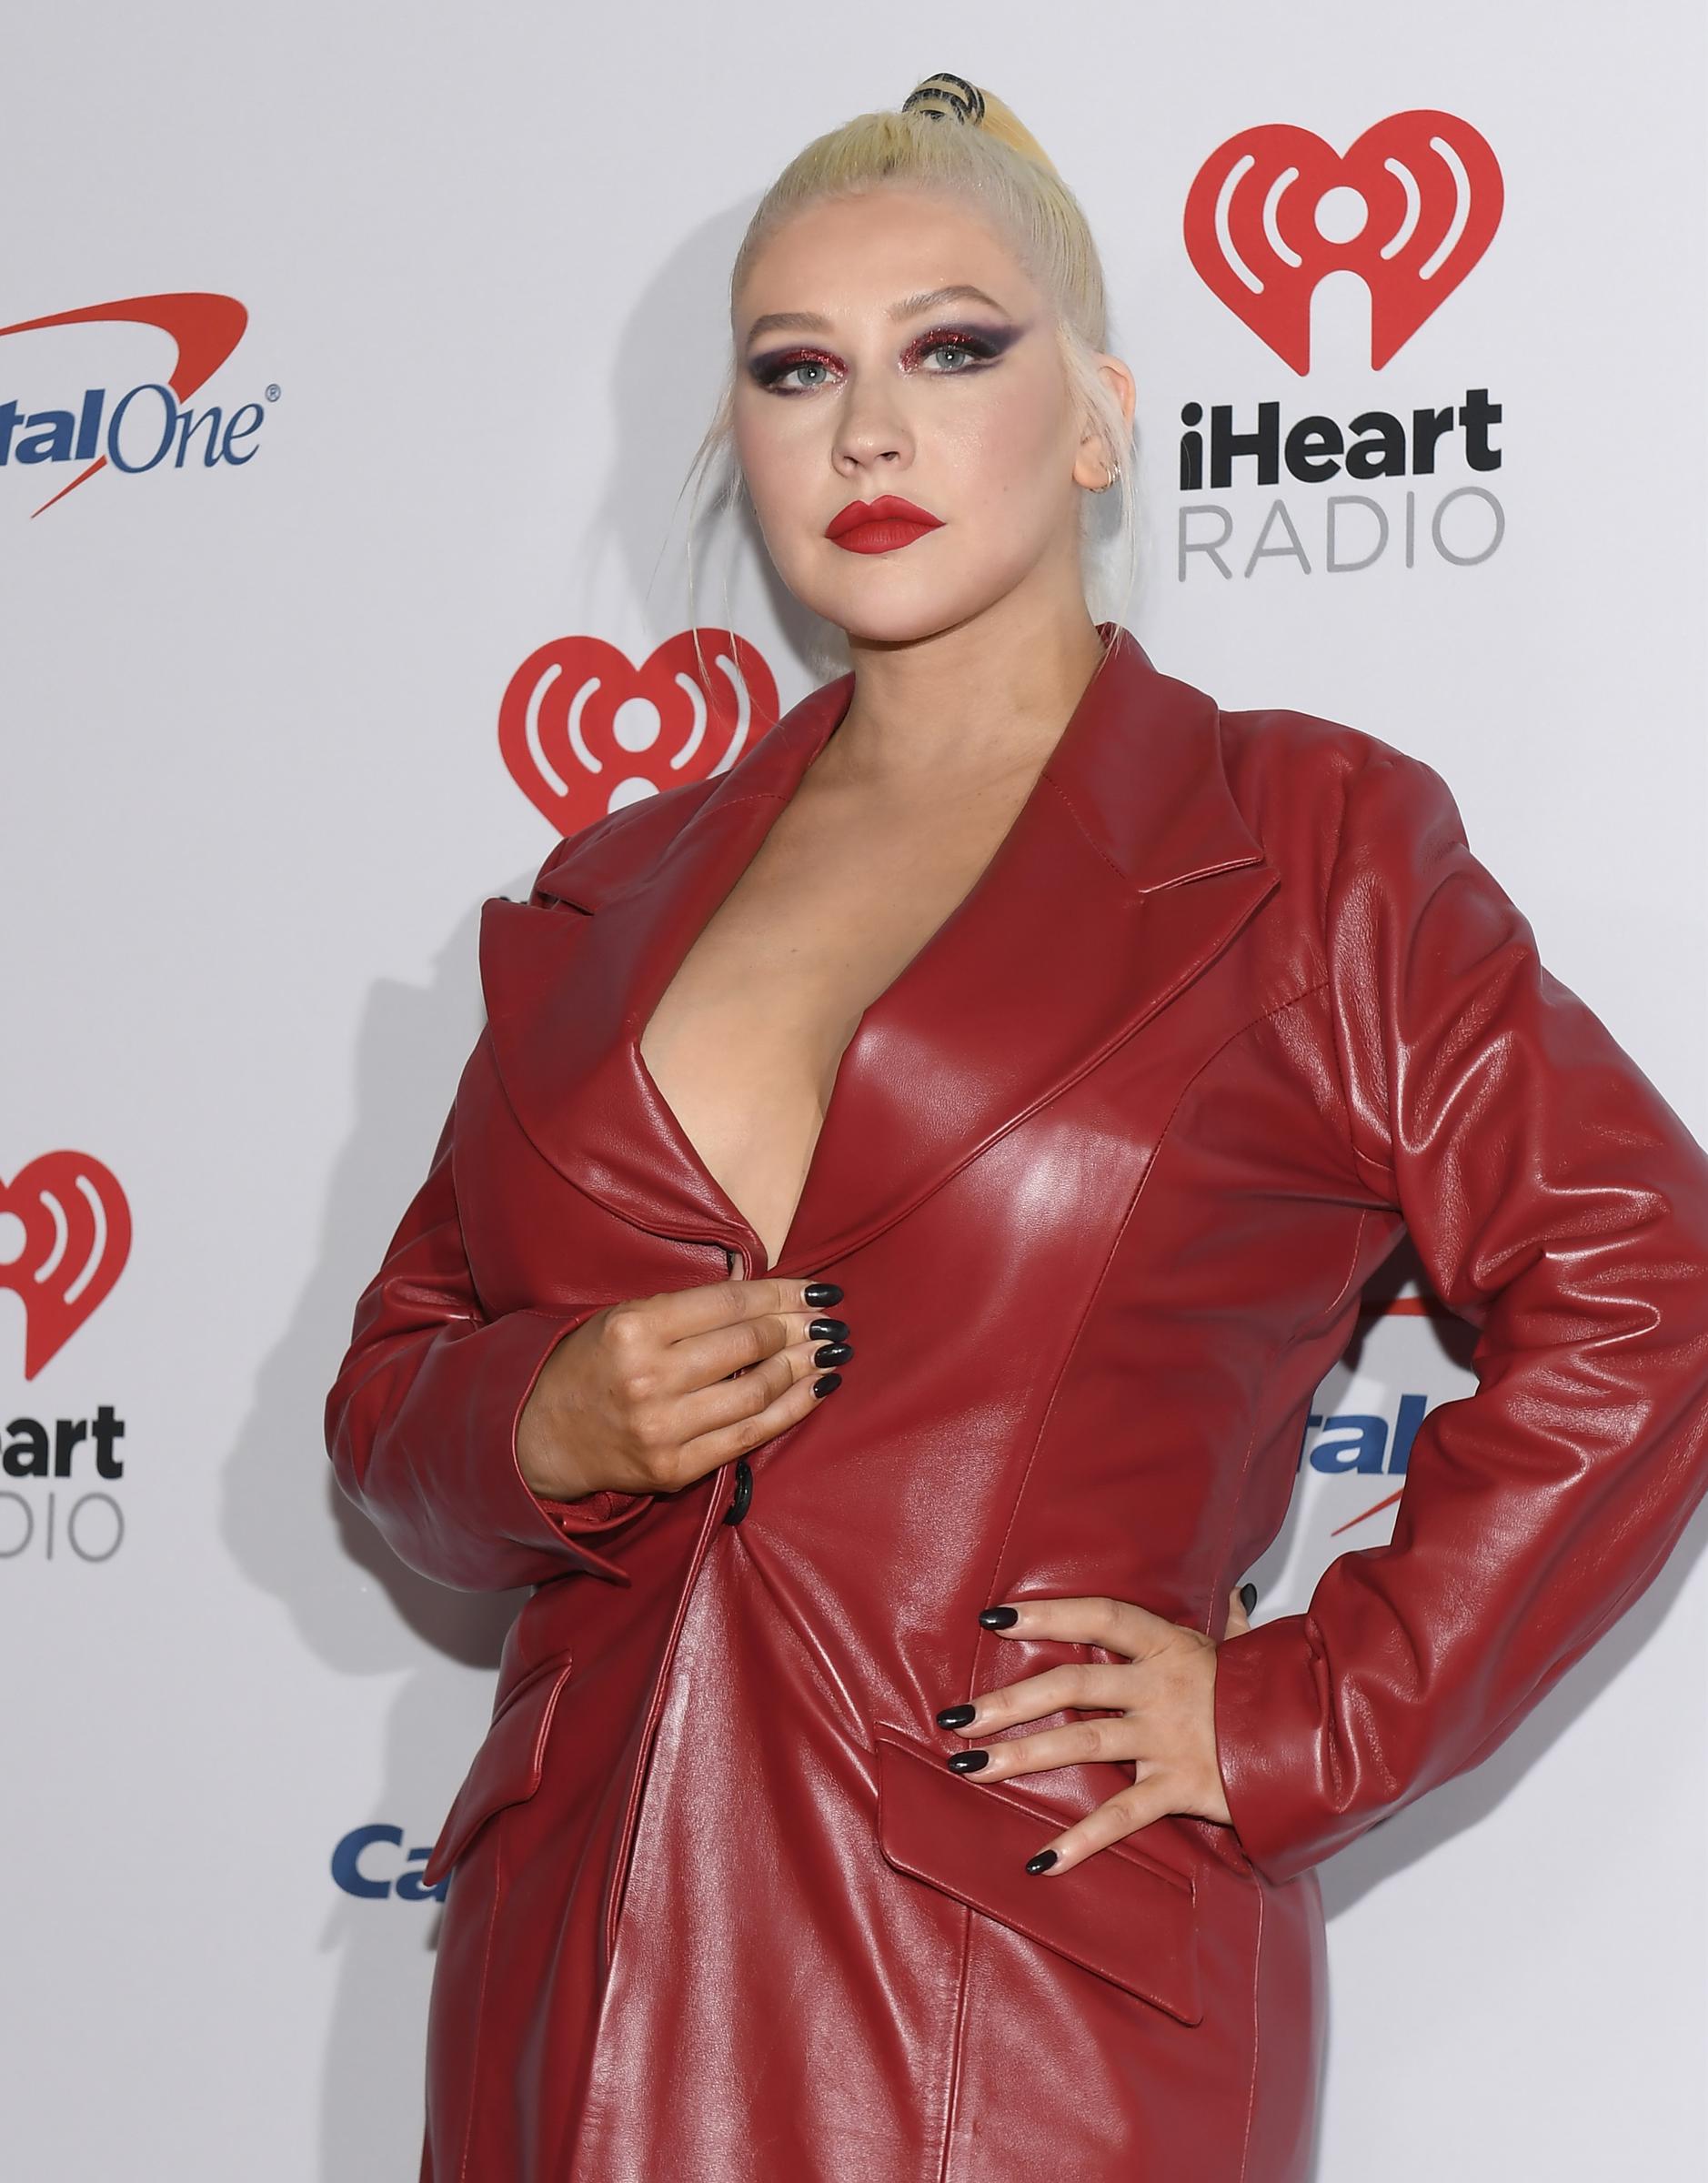 Christina Aguilera attends the iHeartRadio Music Festival and Daytime Stage on September 20, 2019 in Las Vegas, Nevada. | Source: Getty Images